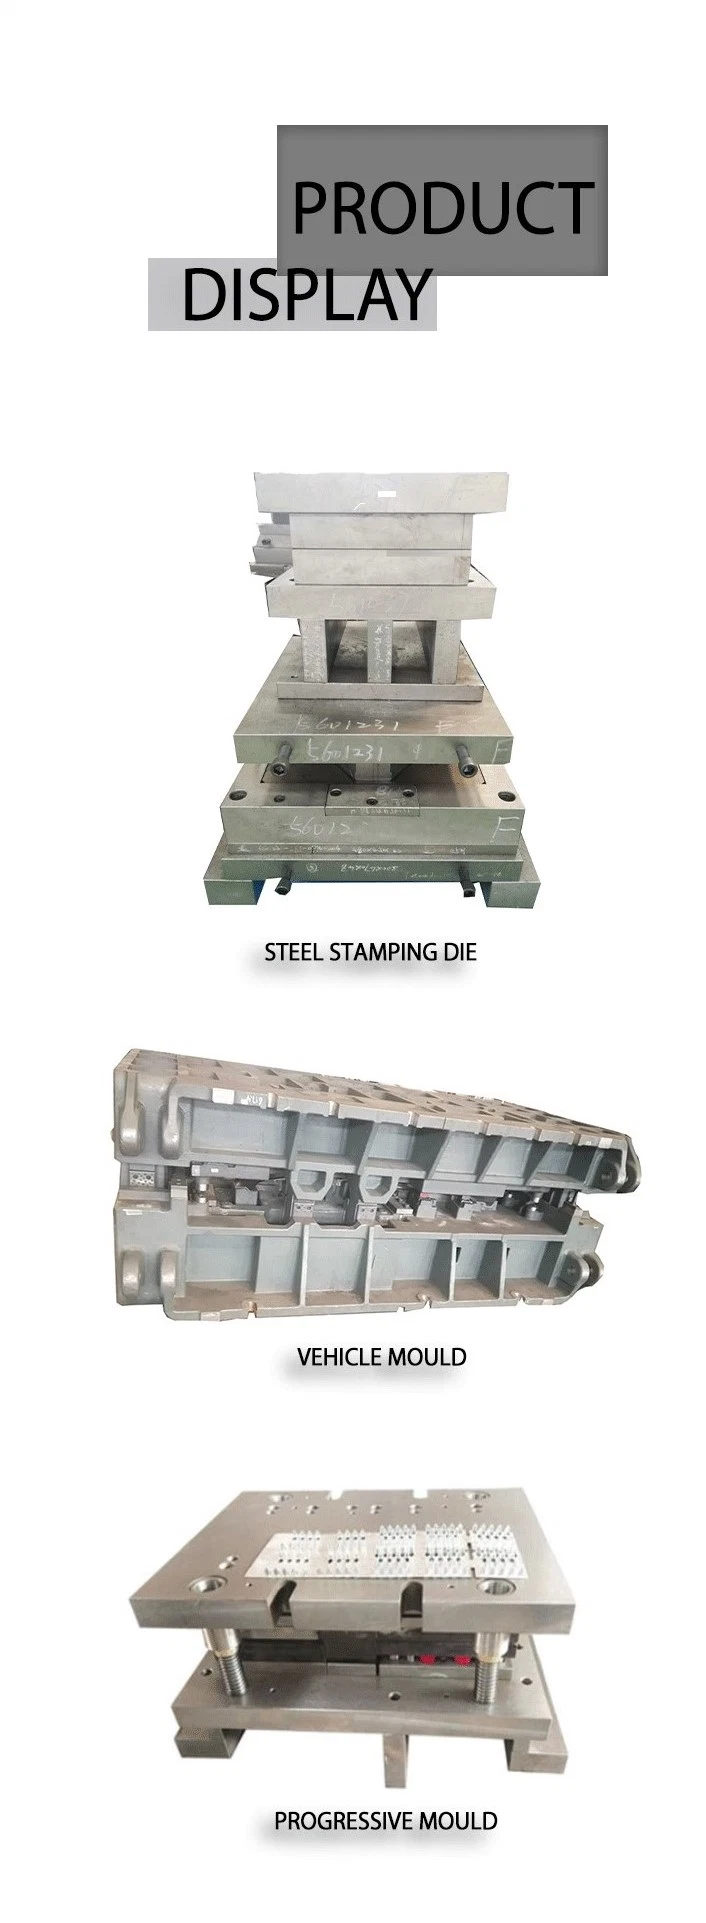 Professional Parts Precision Plastic Injection Mold Tooling Made Mould Molding Manufacturer Maker